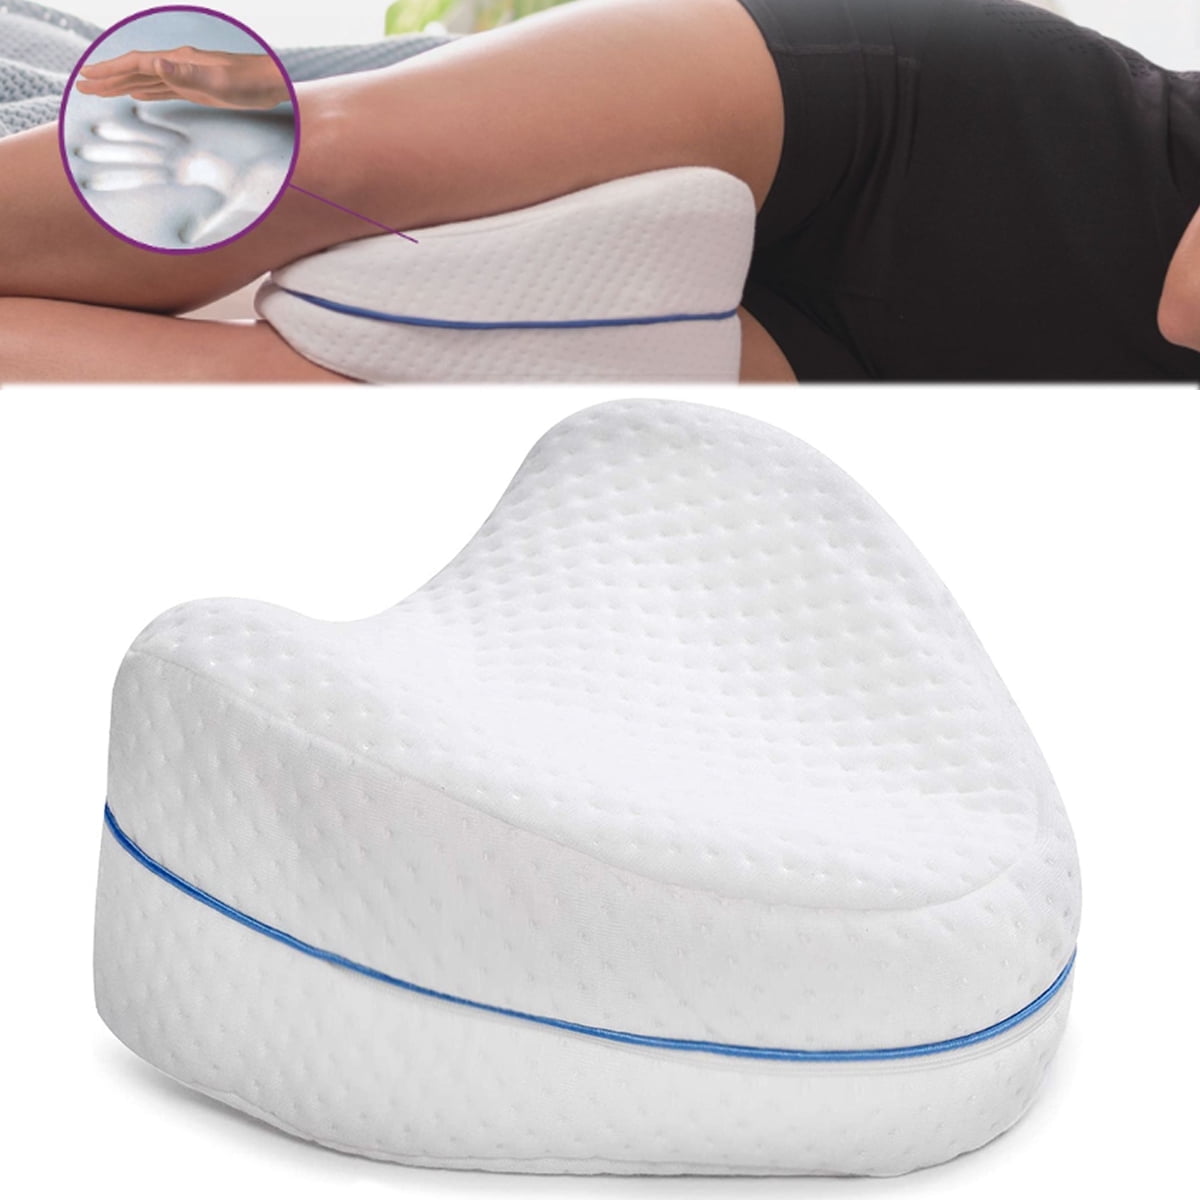 LESUMI Memory Foam Knee Pillow, Sleeping Leg Pillow, for Side Sleepers & Pregnant Women - for Spinal Alignment, Relief Sciatica, Knee, Back, Leg & Hip